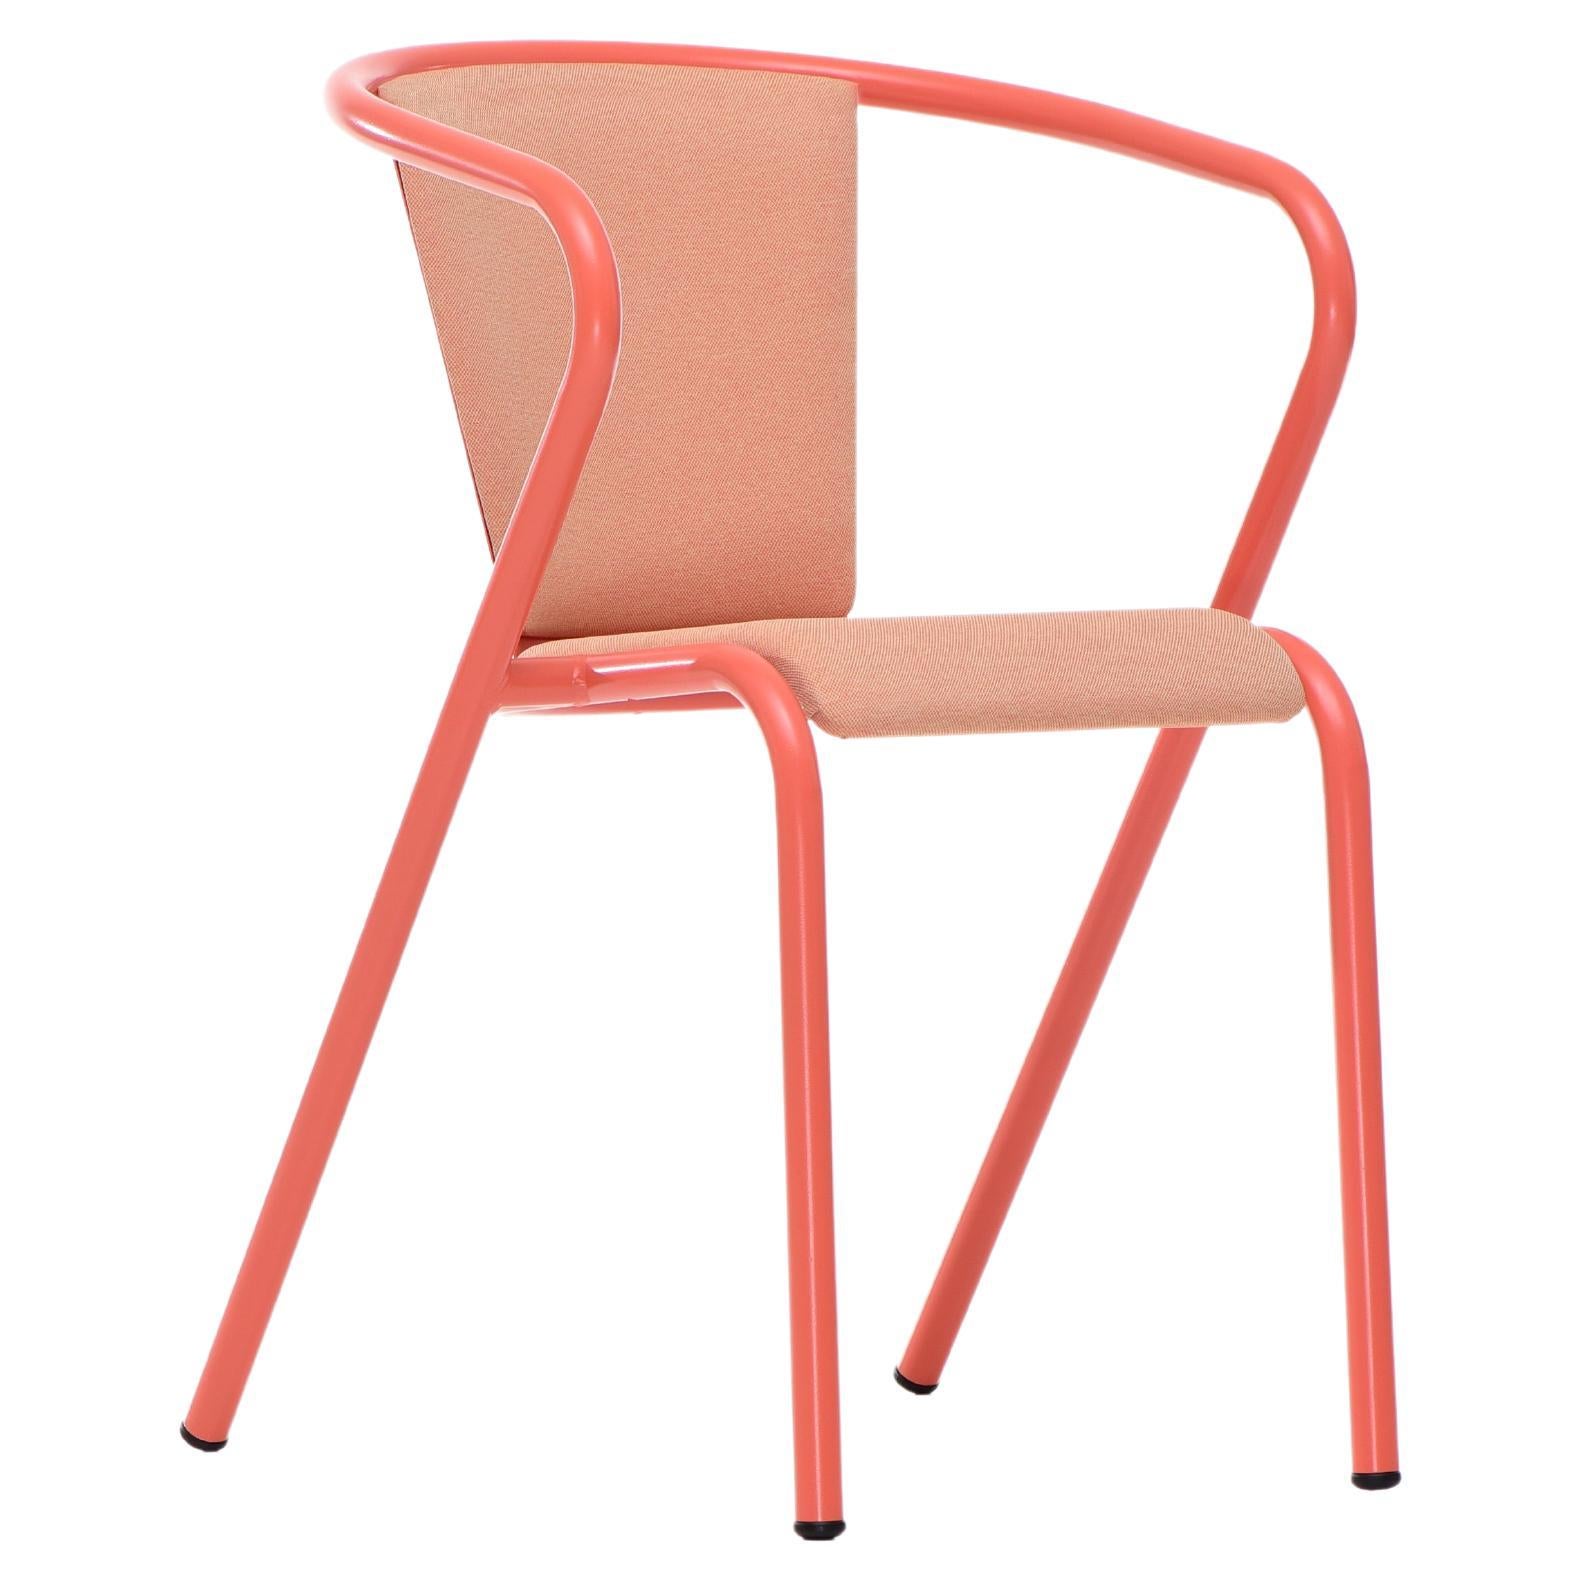 BICAchair Modern Steel Armchair Salmon Pink, Upholstery in Eco-Fabric